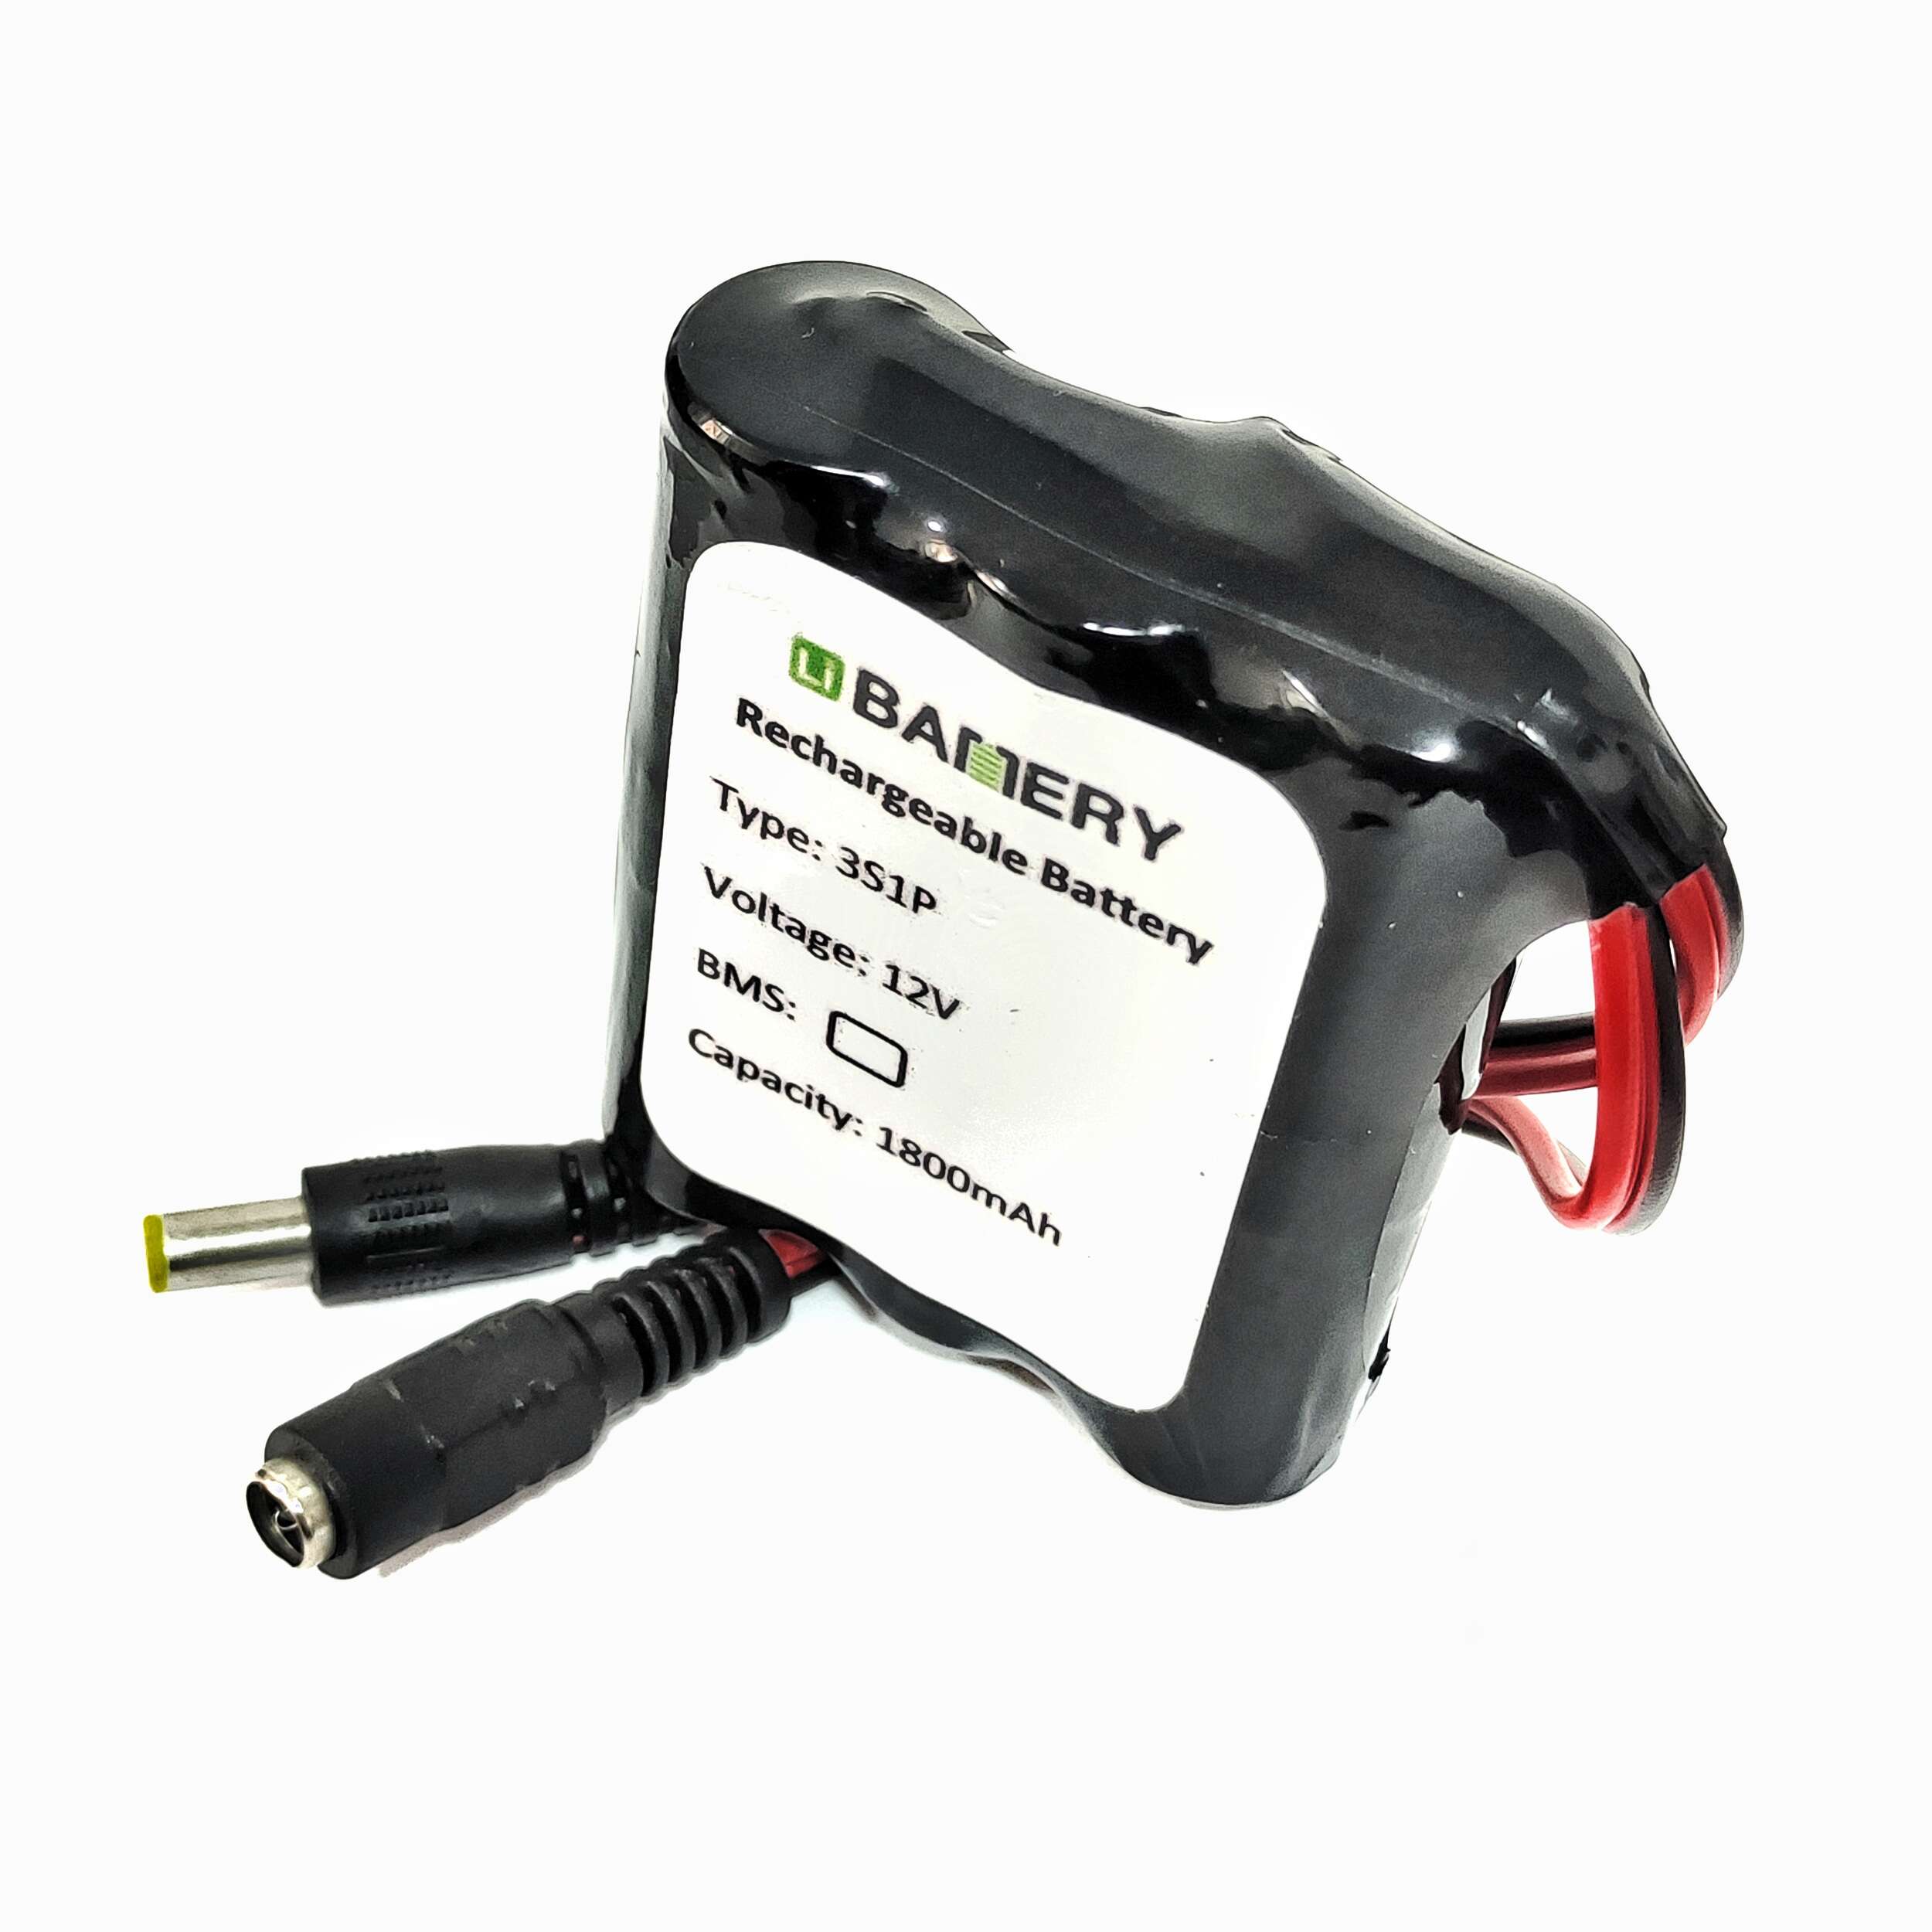 12V 3S-1P 1800mAh Rechargeable 18650 Li-ion Battery Pack